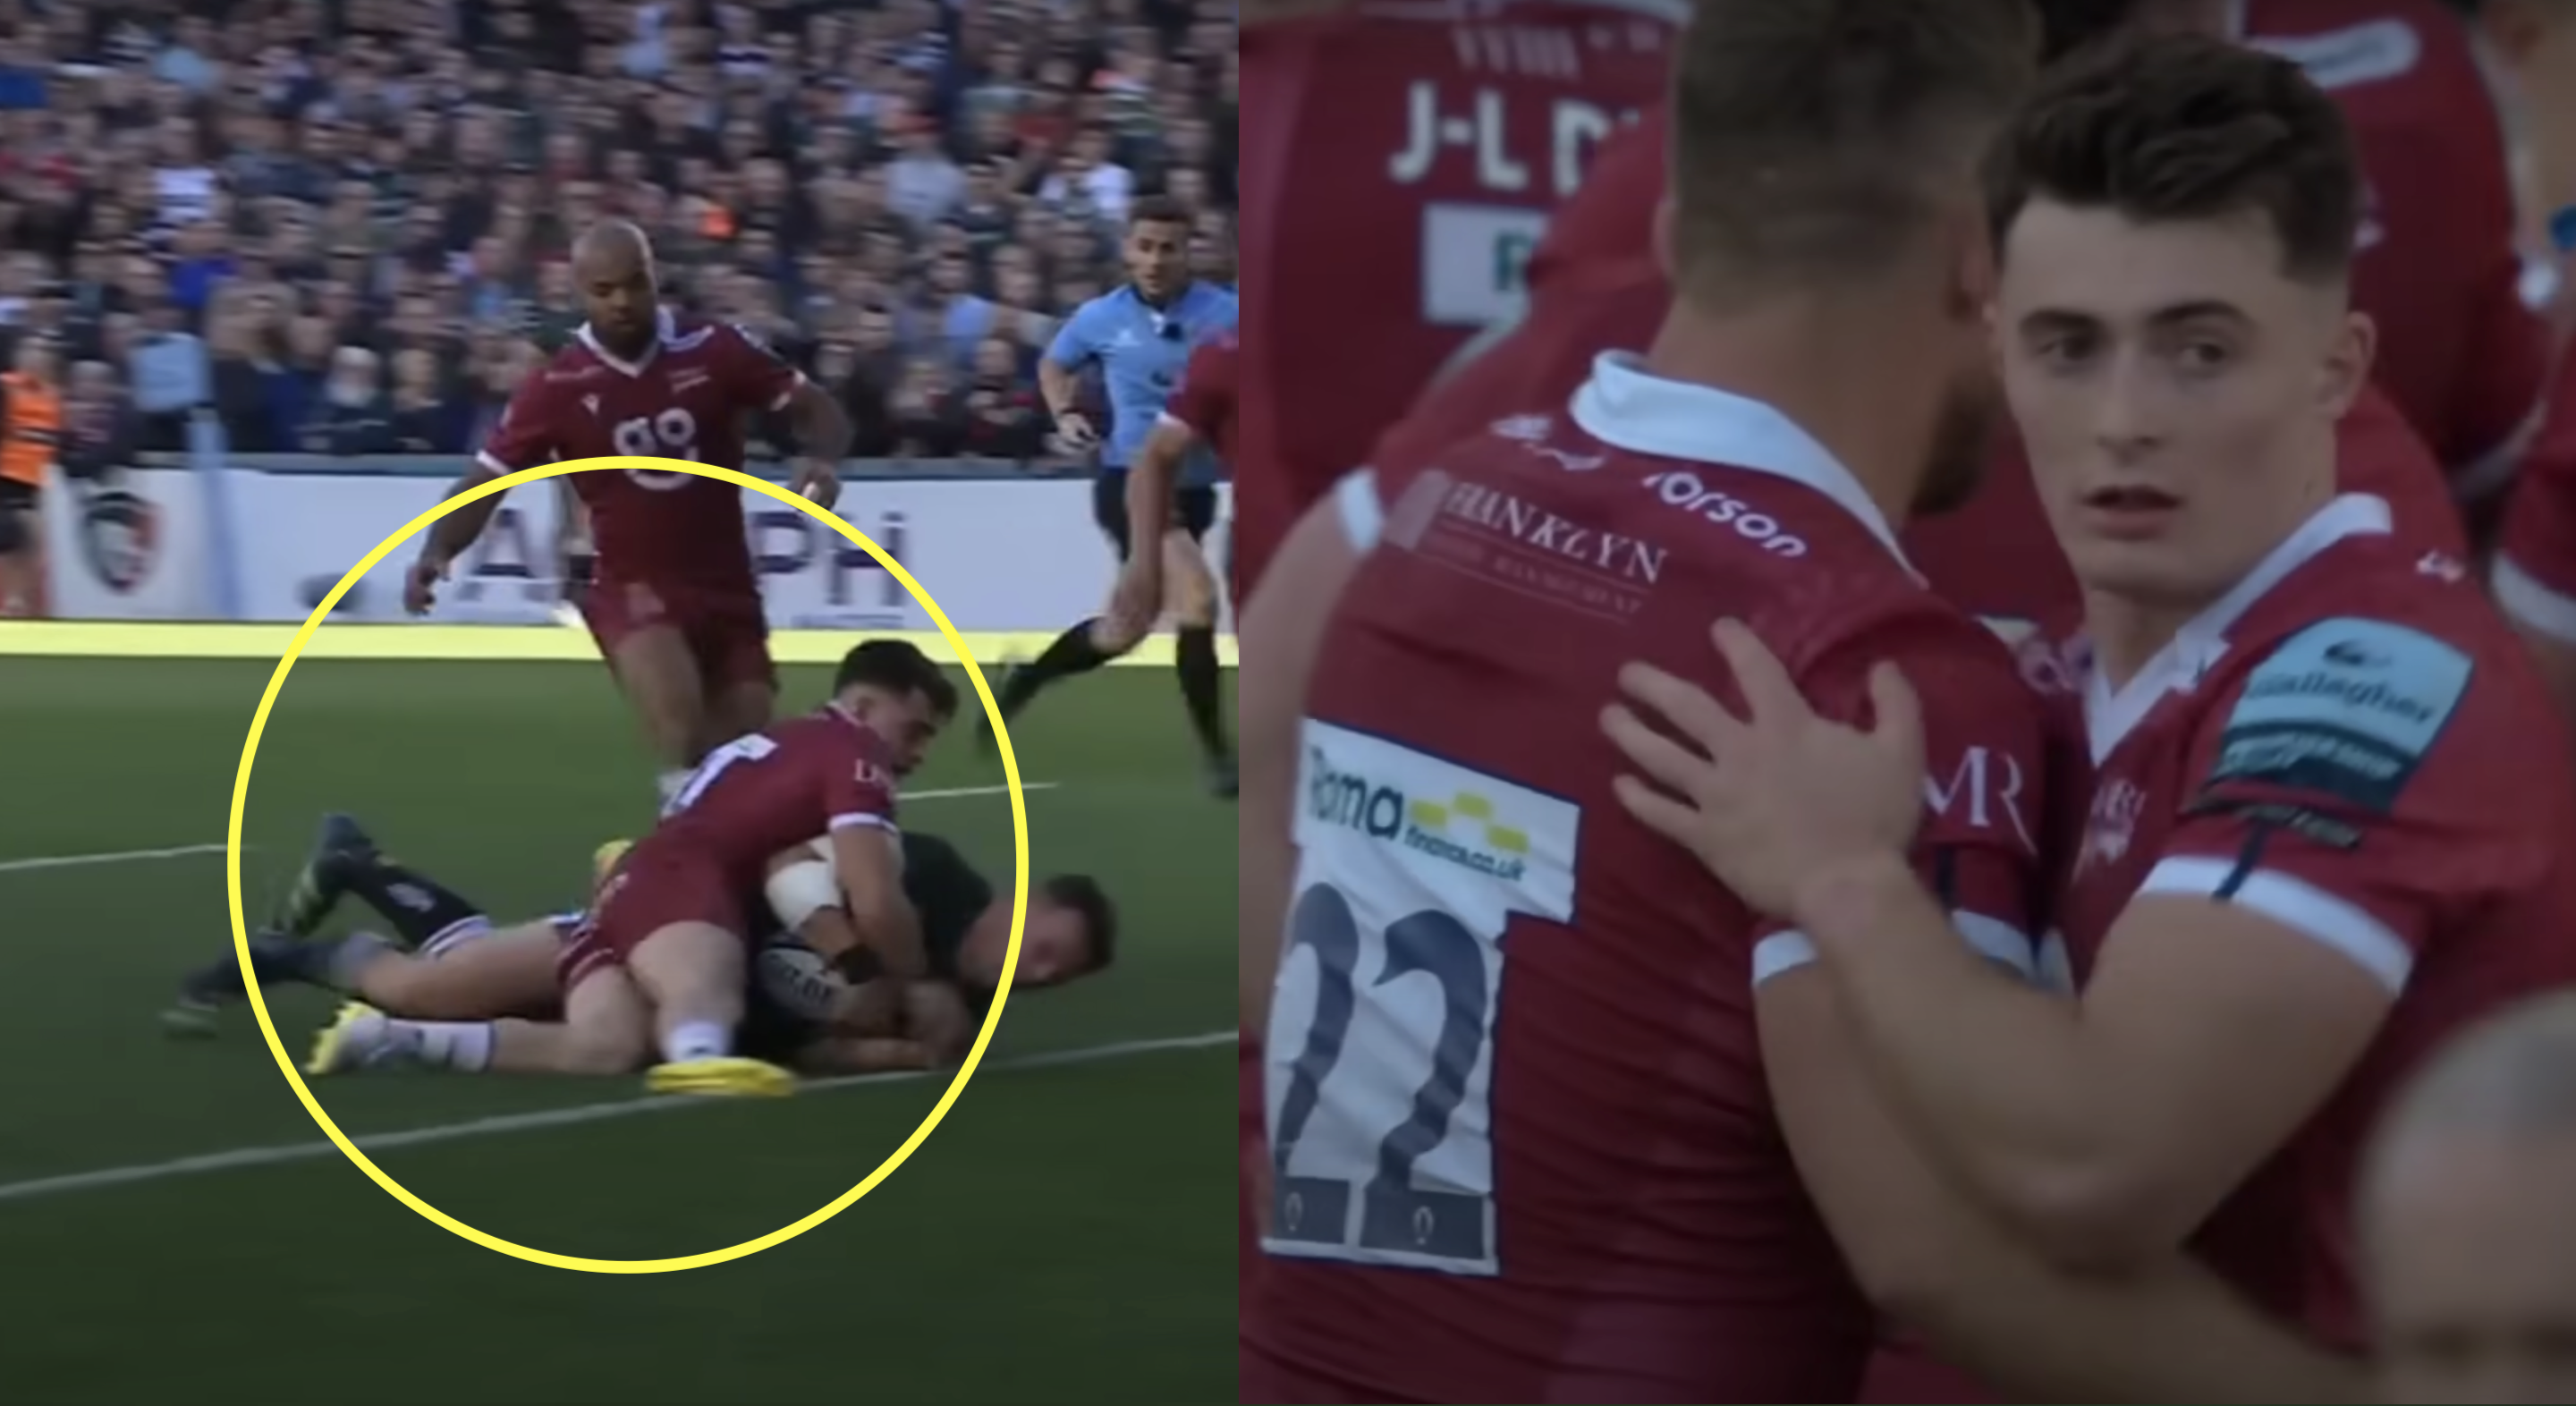 Raffi Quirke wrestles player almost 20kg heavier in epic try saving tackle